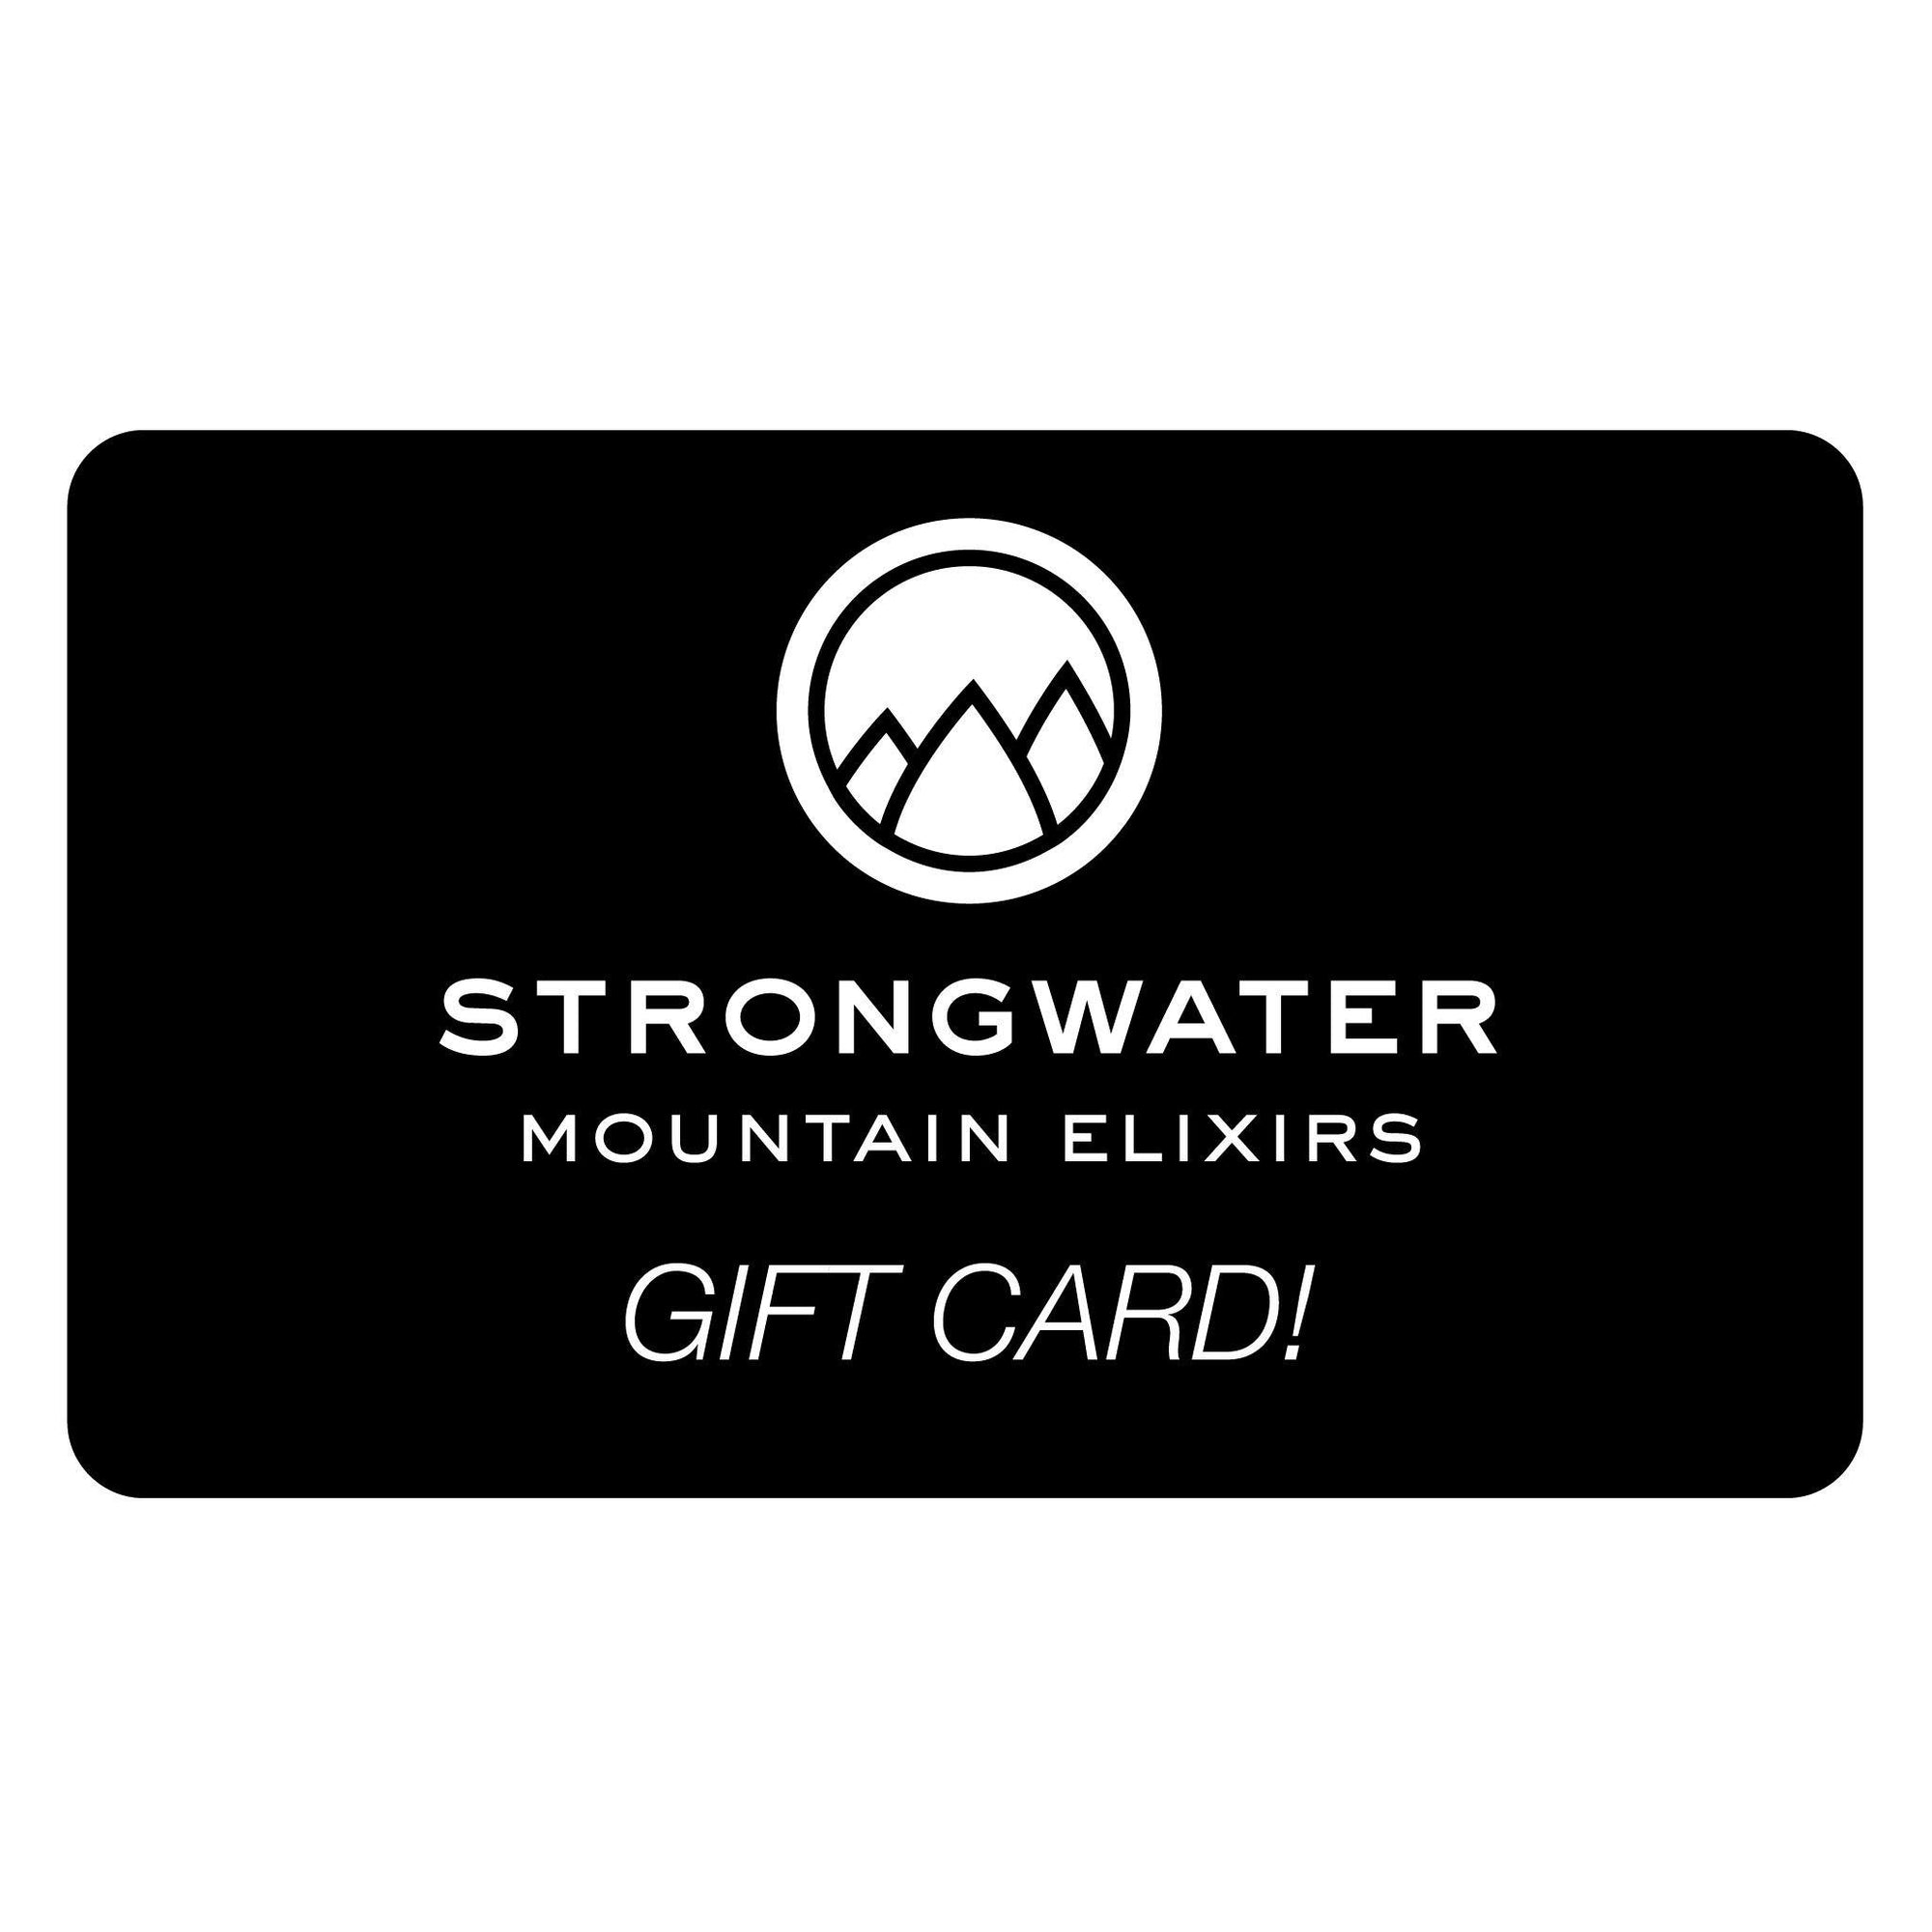 The Strongwater Gift Card - Strongwater - Cocktail Bitters